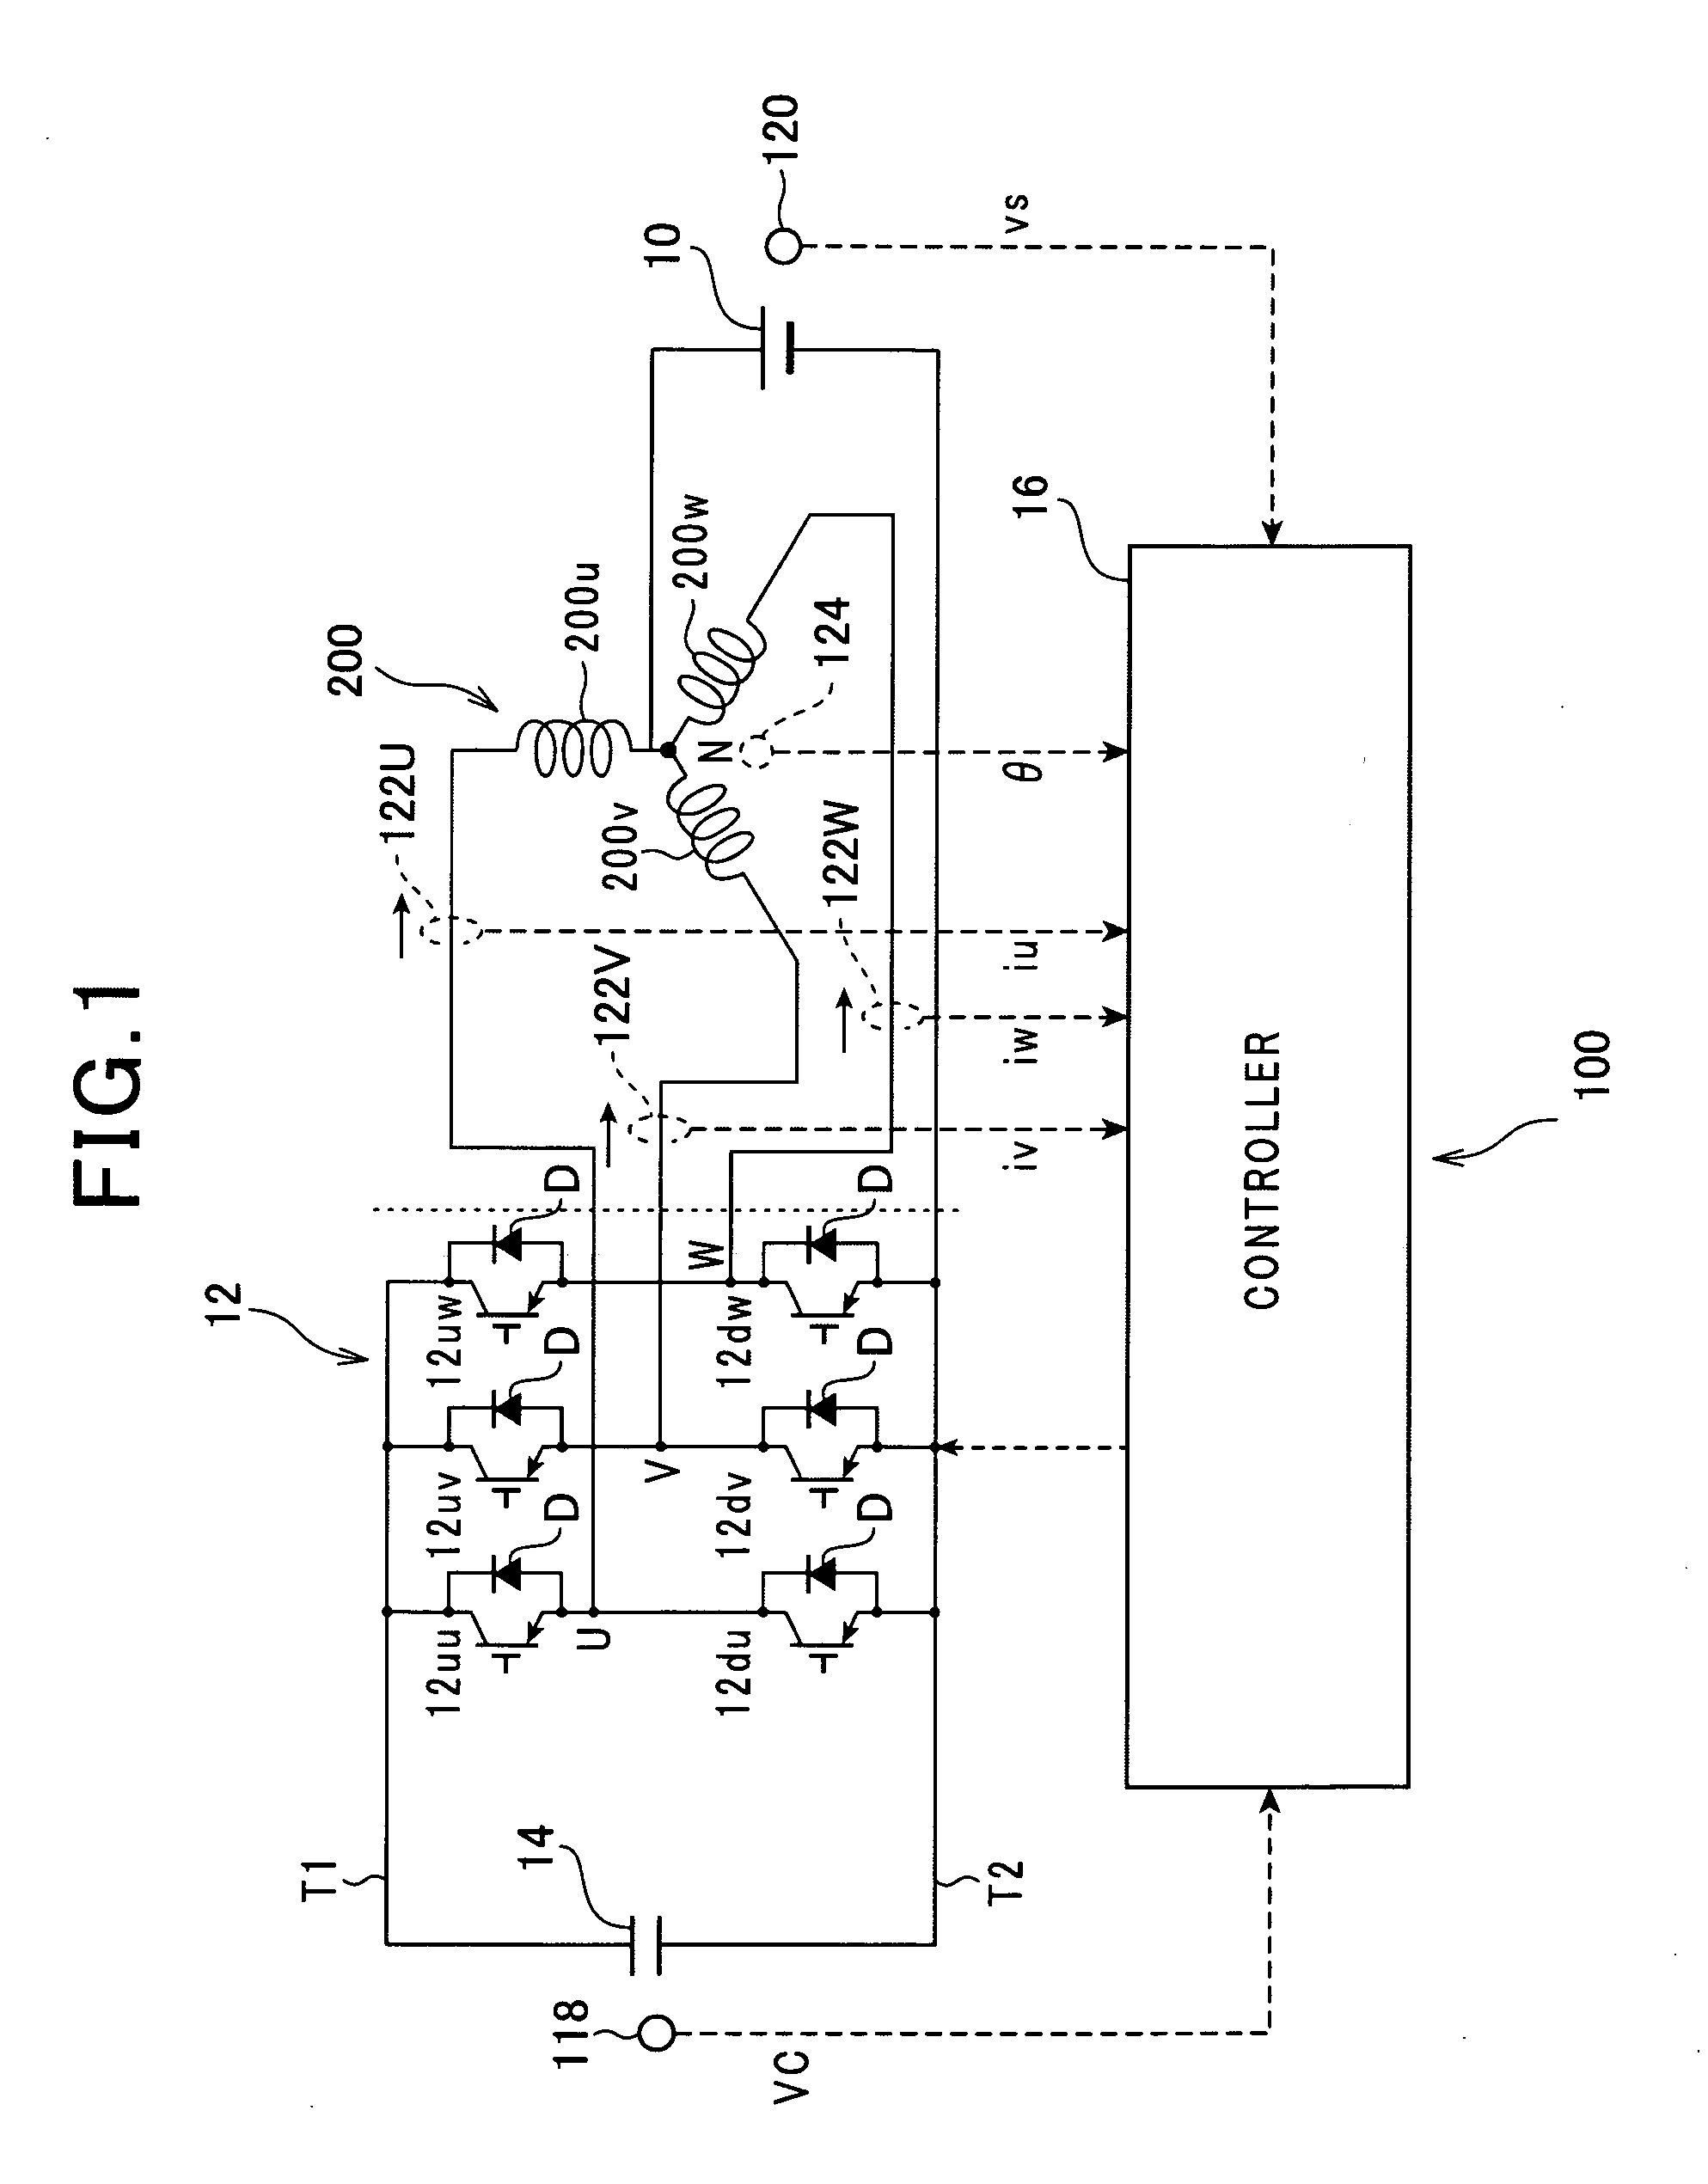 Motor drive system using potential at neutral point